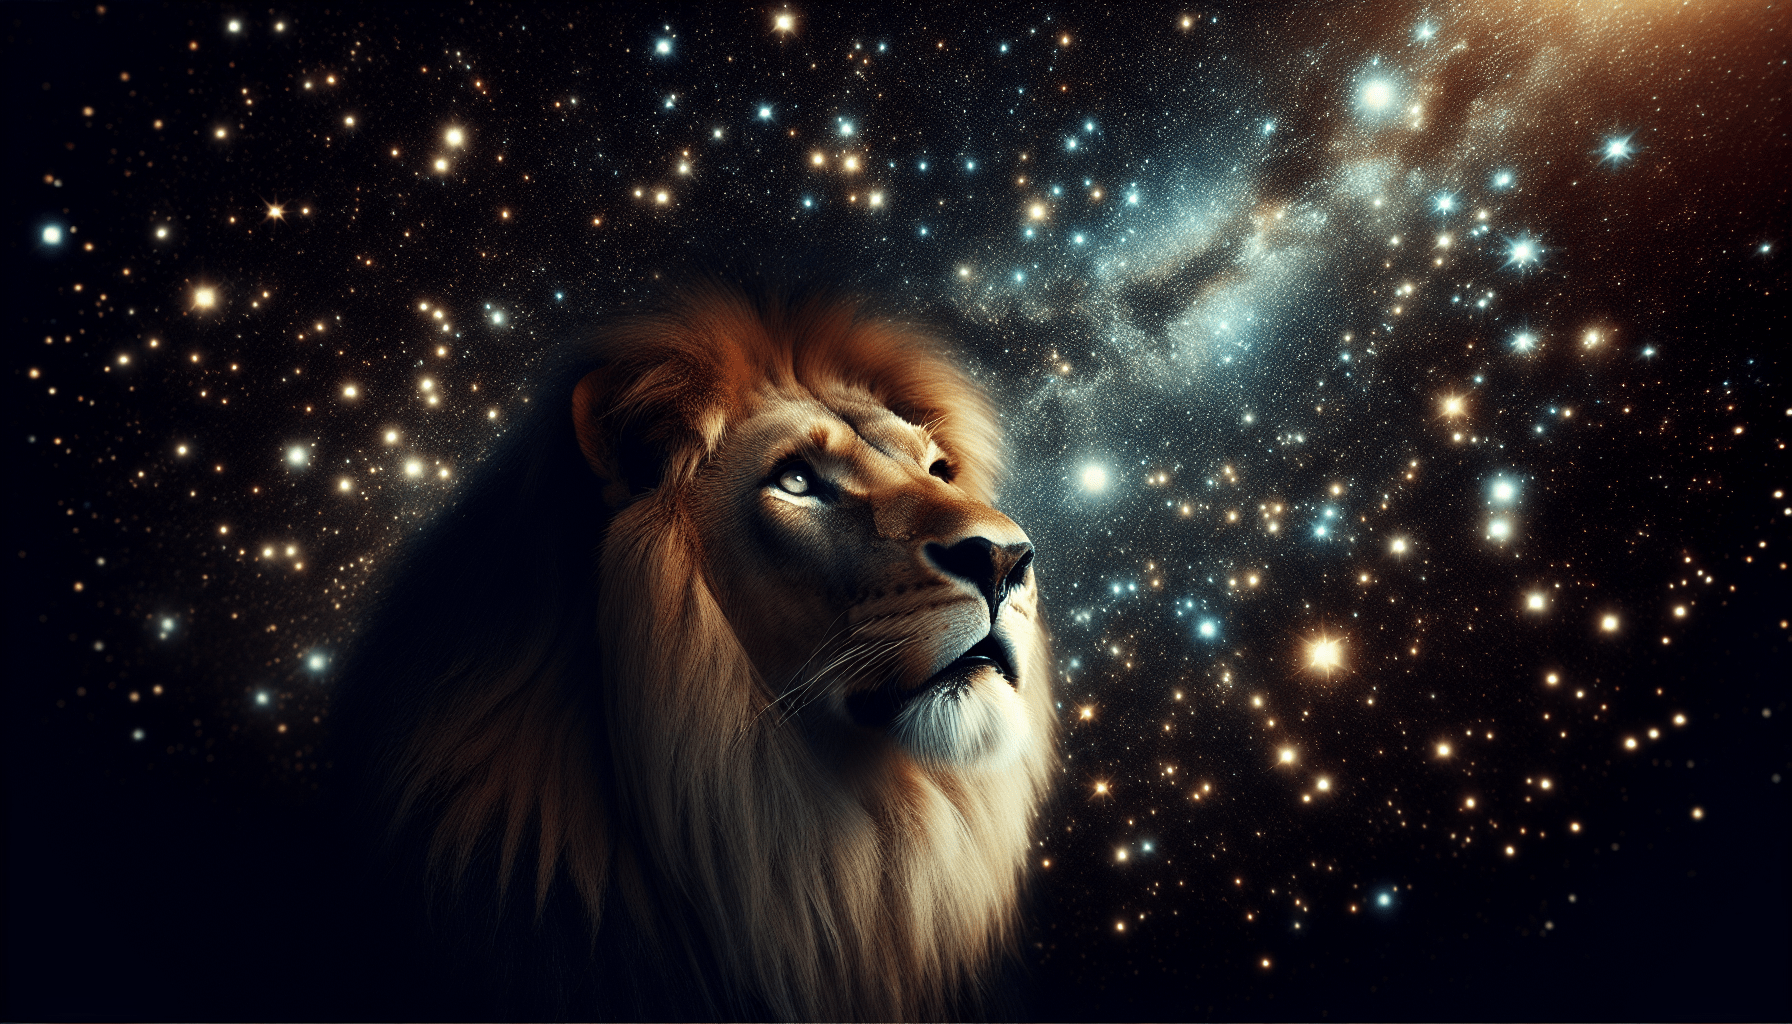 What Do Lions Think About When They Look At The Stars?